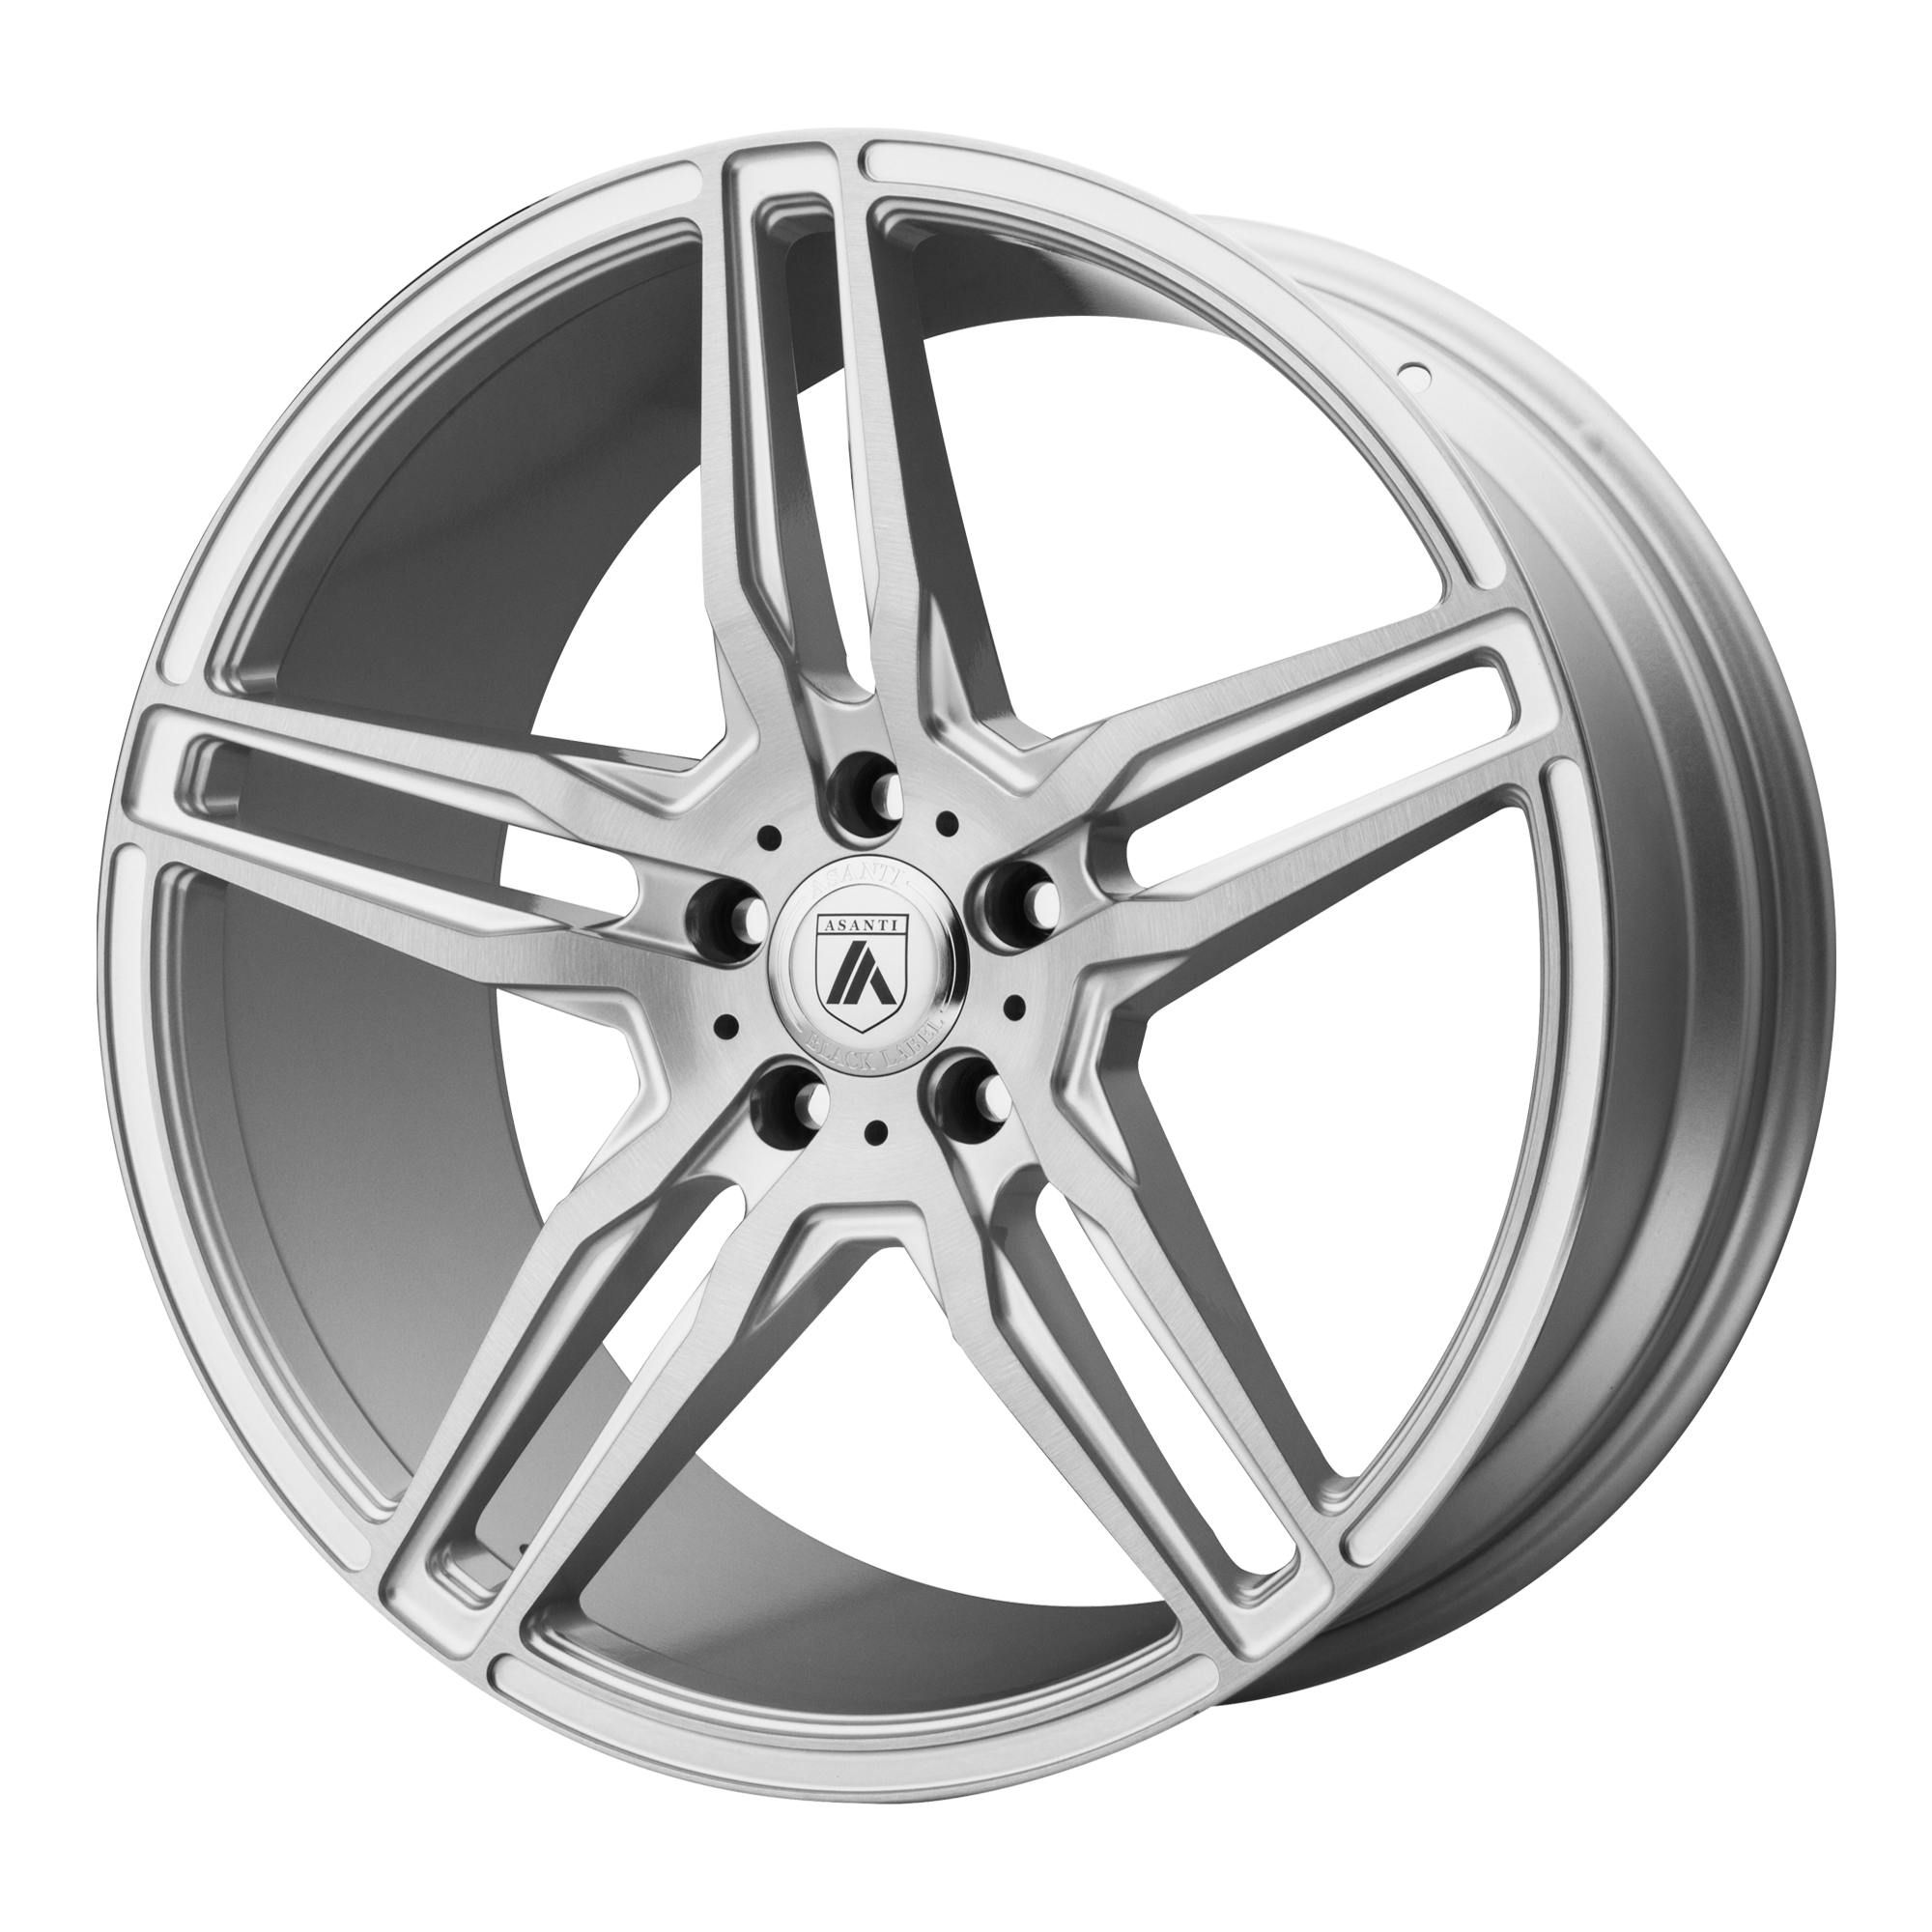 ORION 20x10.5 Blank BRUSHED SILVER (38.00 - 45.00 mm) - Tires and Engine Performance